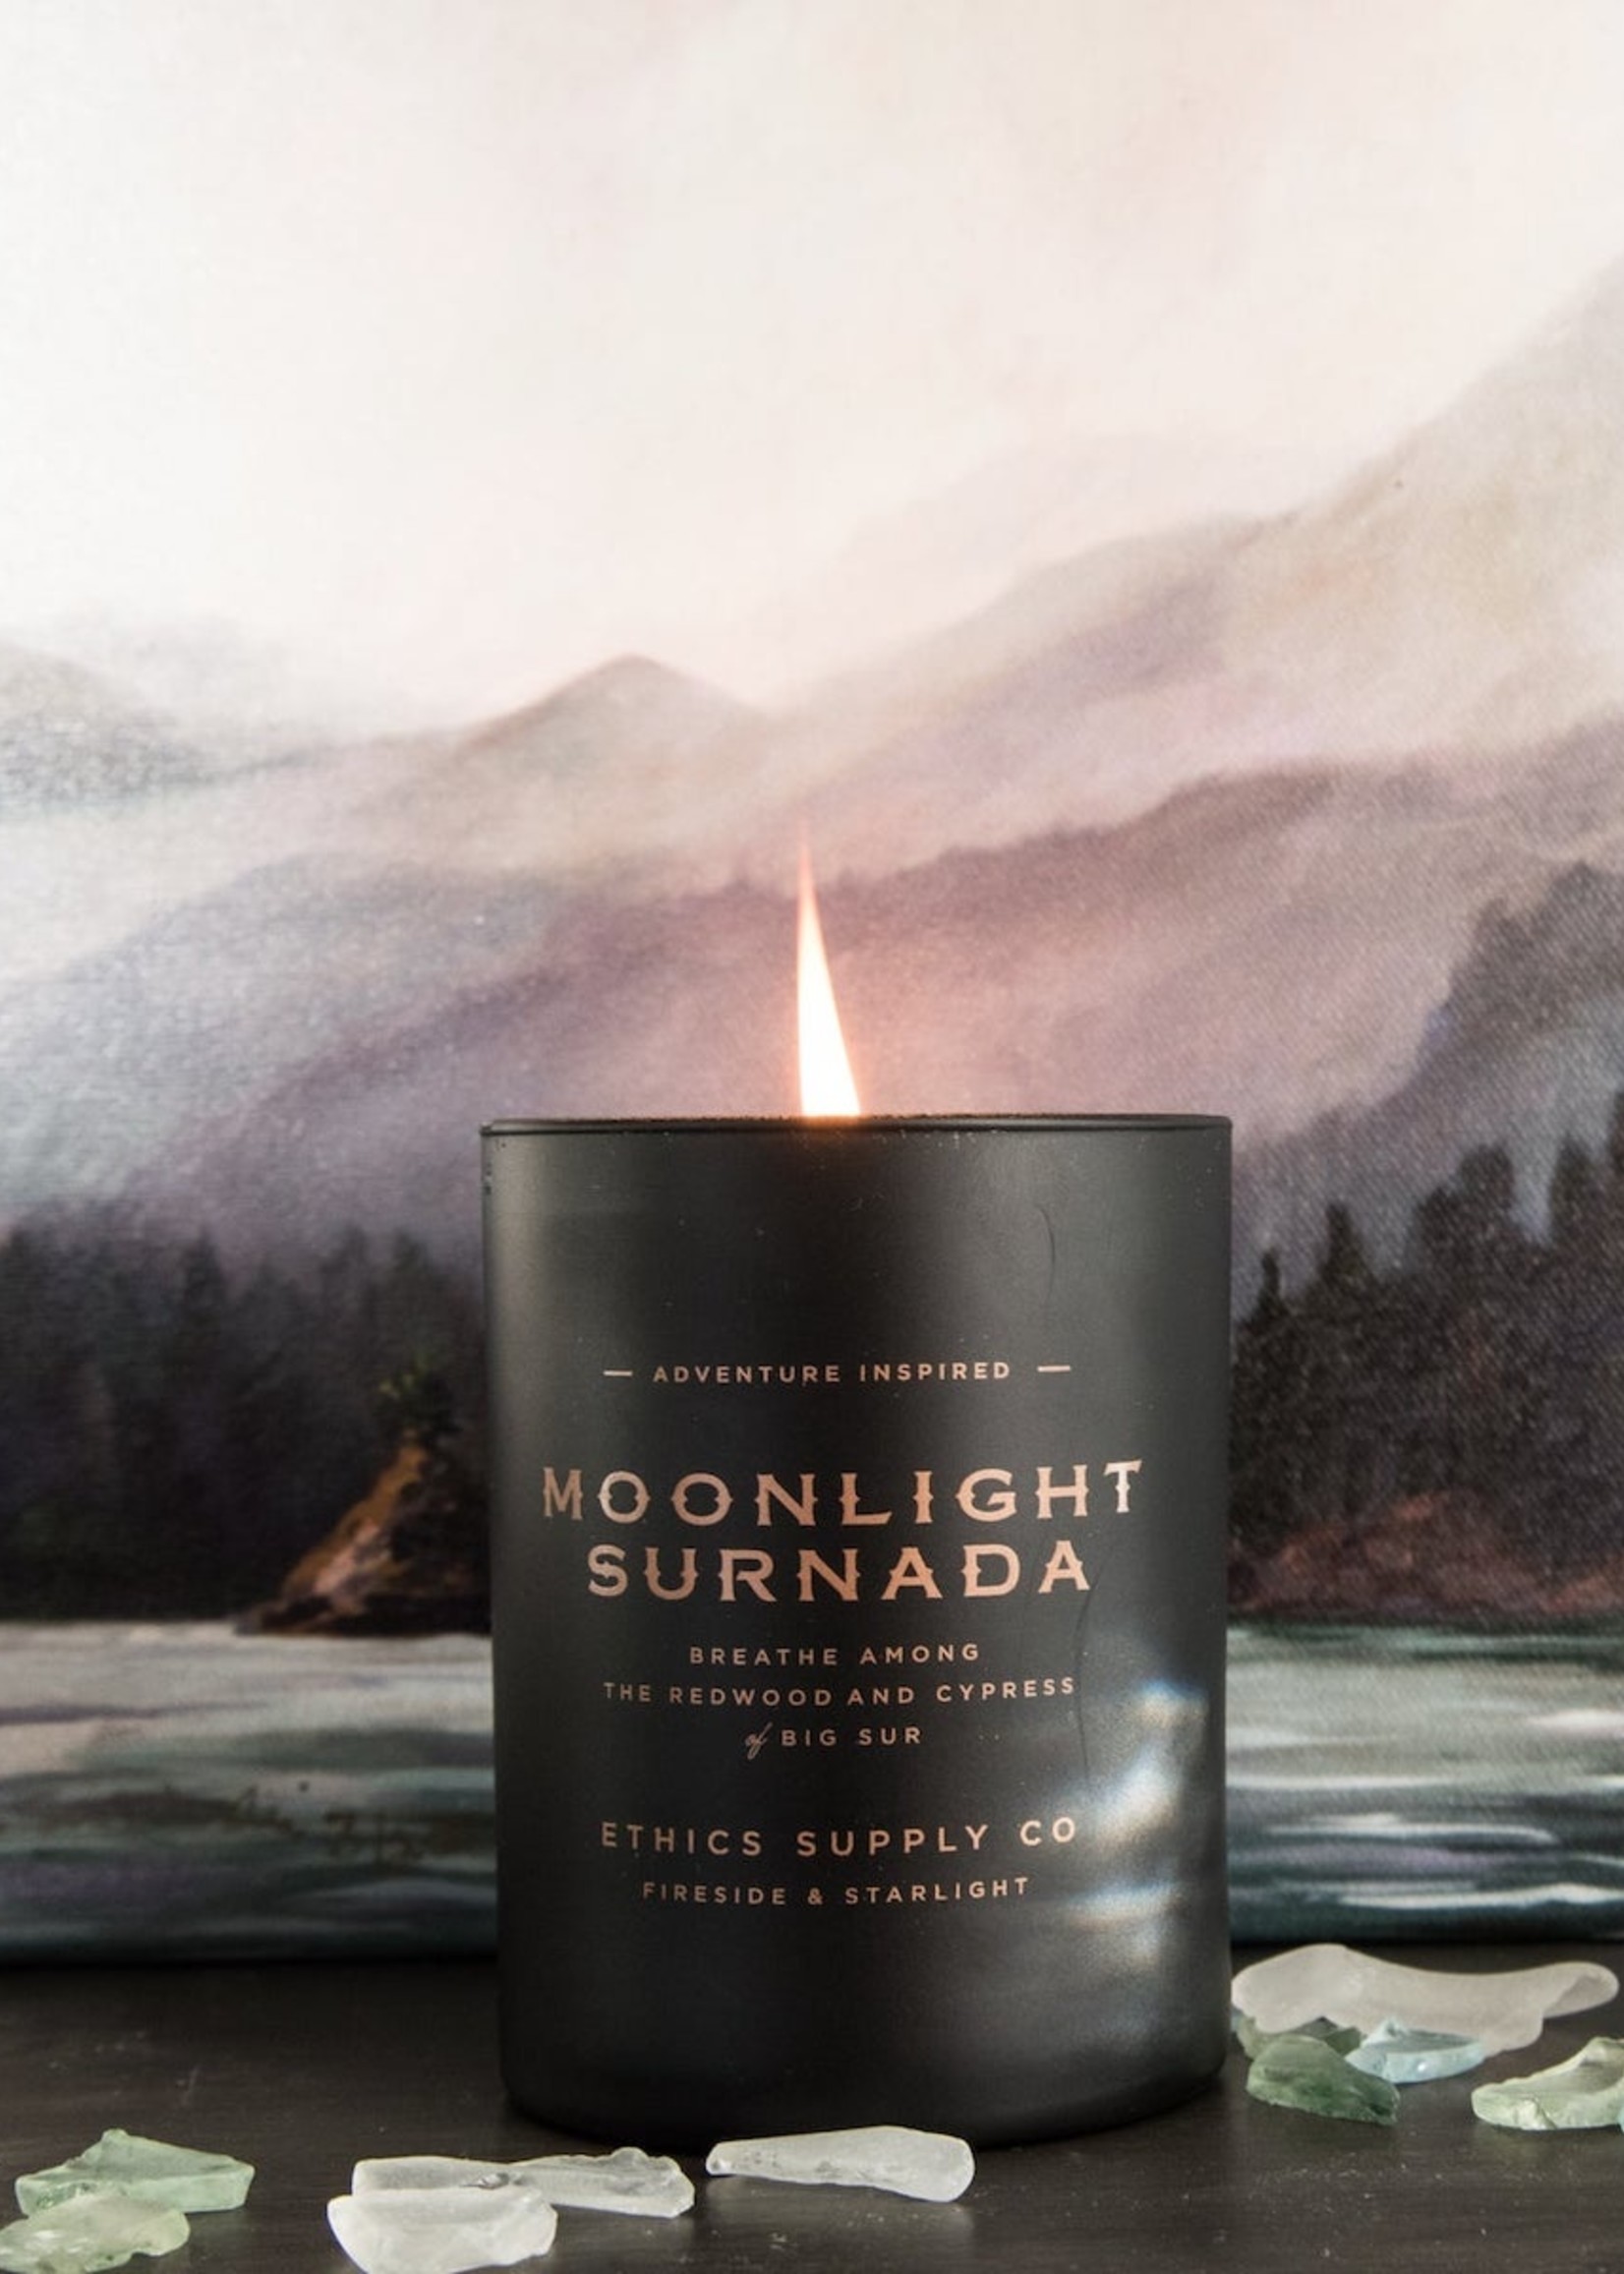 Ethics Supply Co Ethics Supply Co. Moonlight Surnada Candle